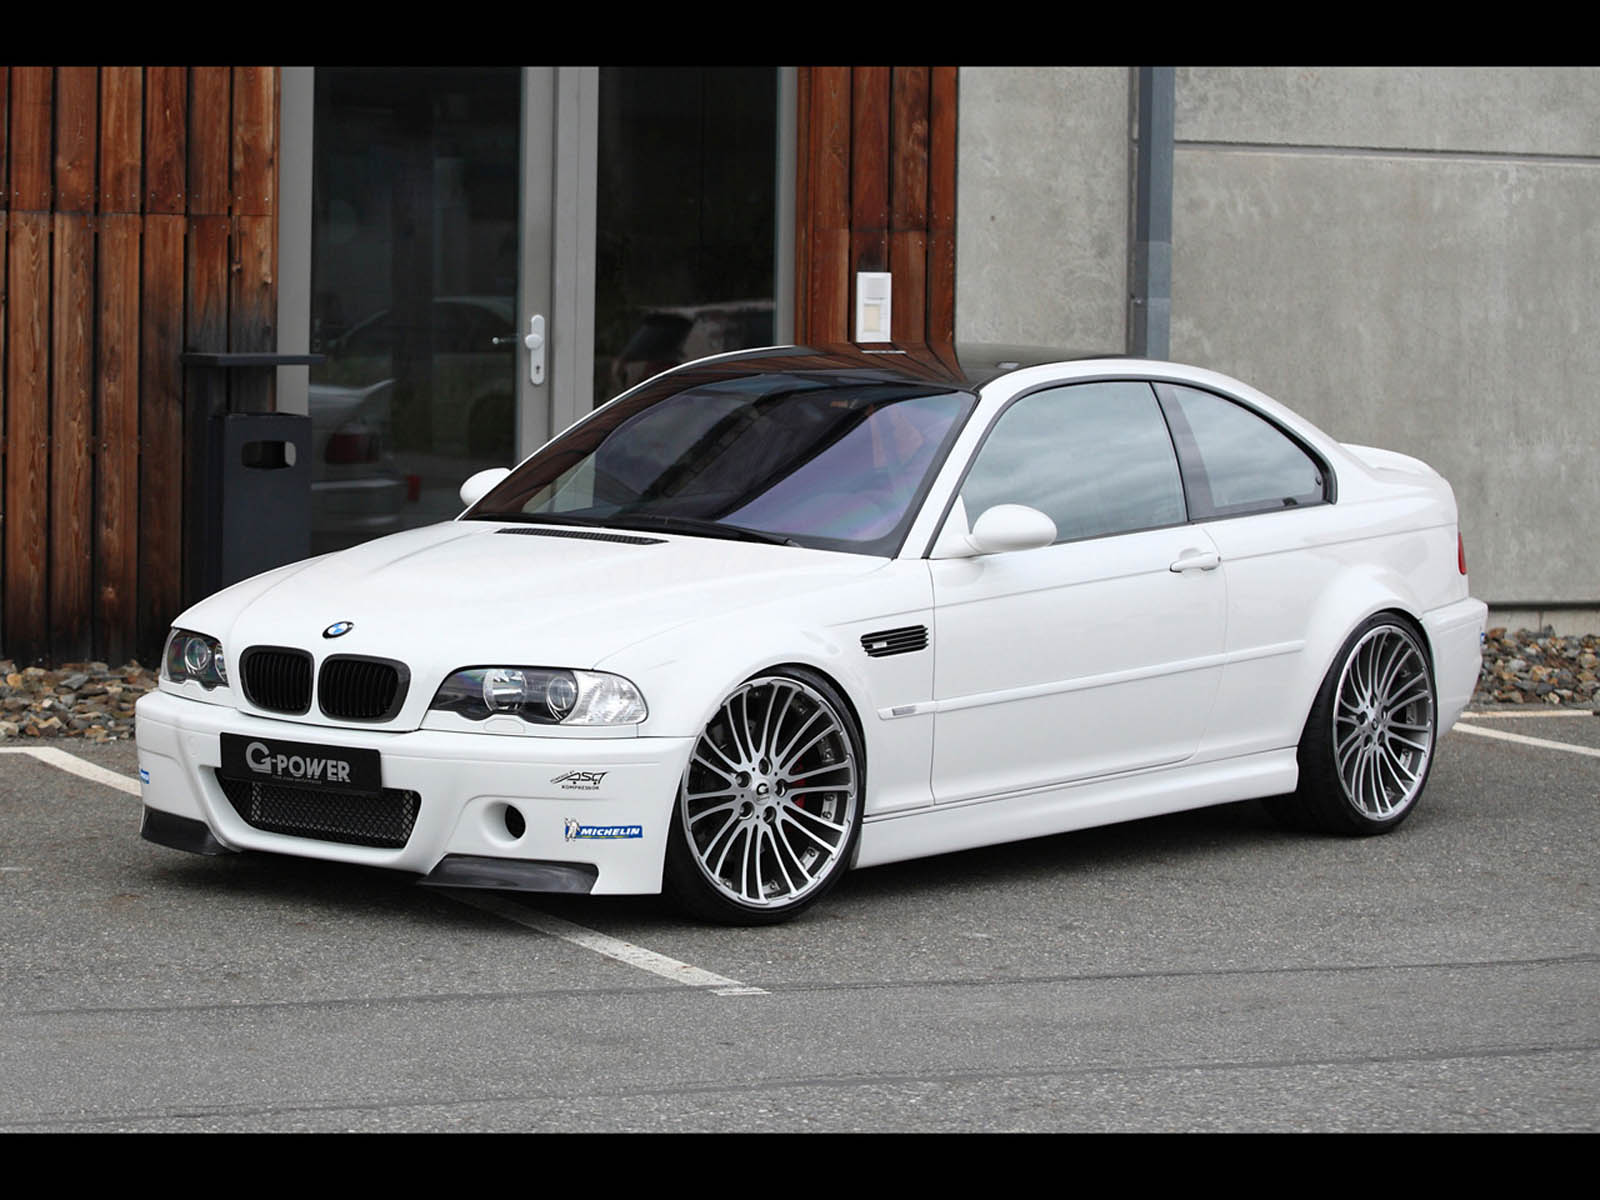 Wallpapers: BMW M3 E46 CSL Car Wallpapers